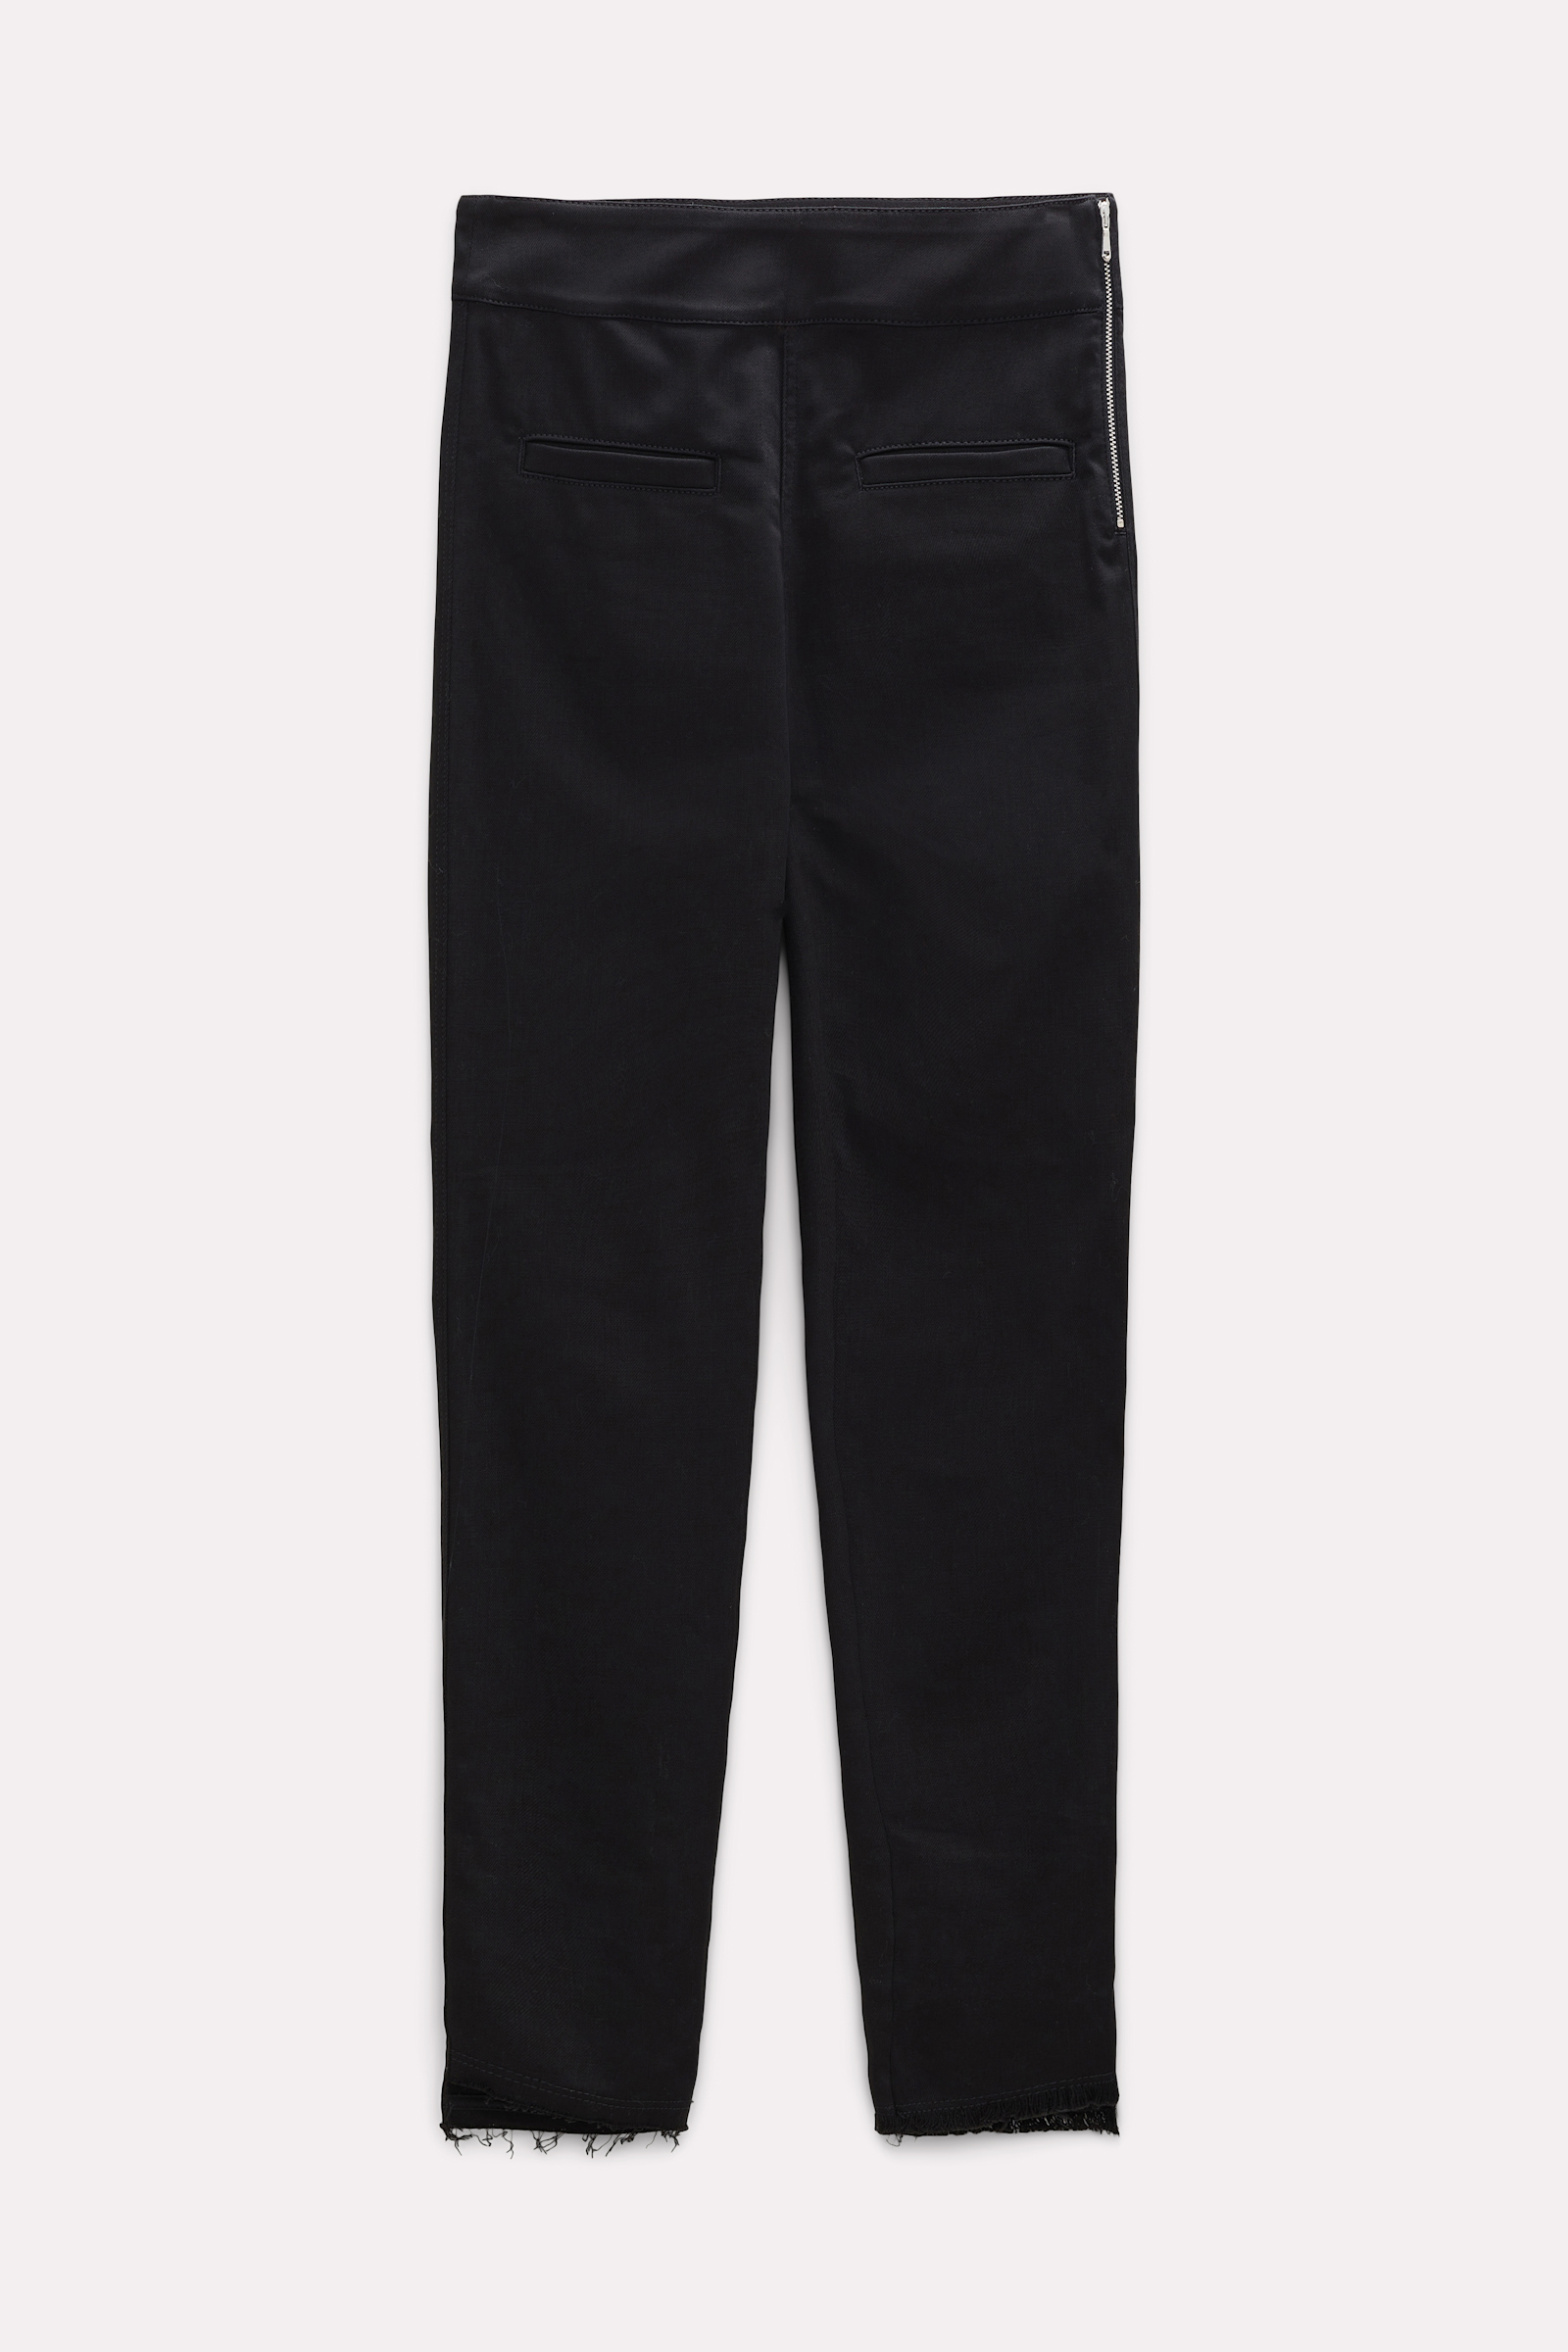 Dorothee Schumacher Jeans with frayed hems pure black